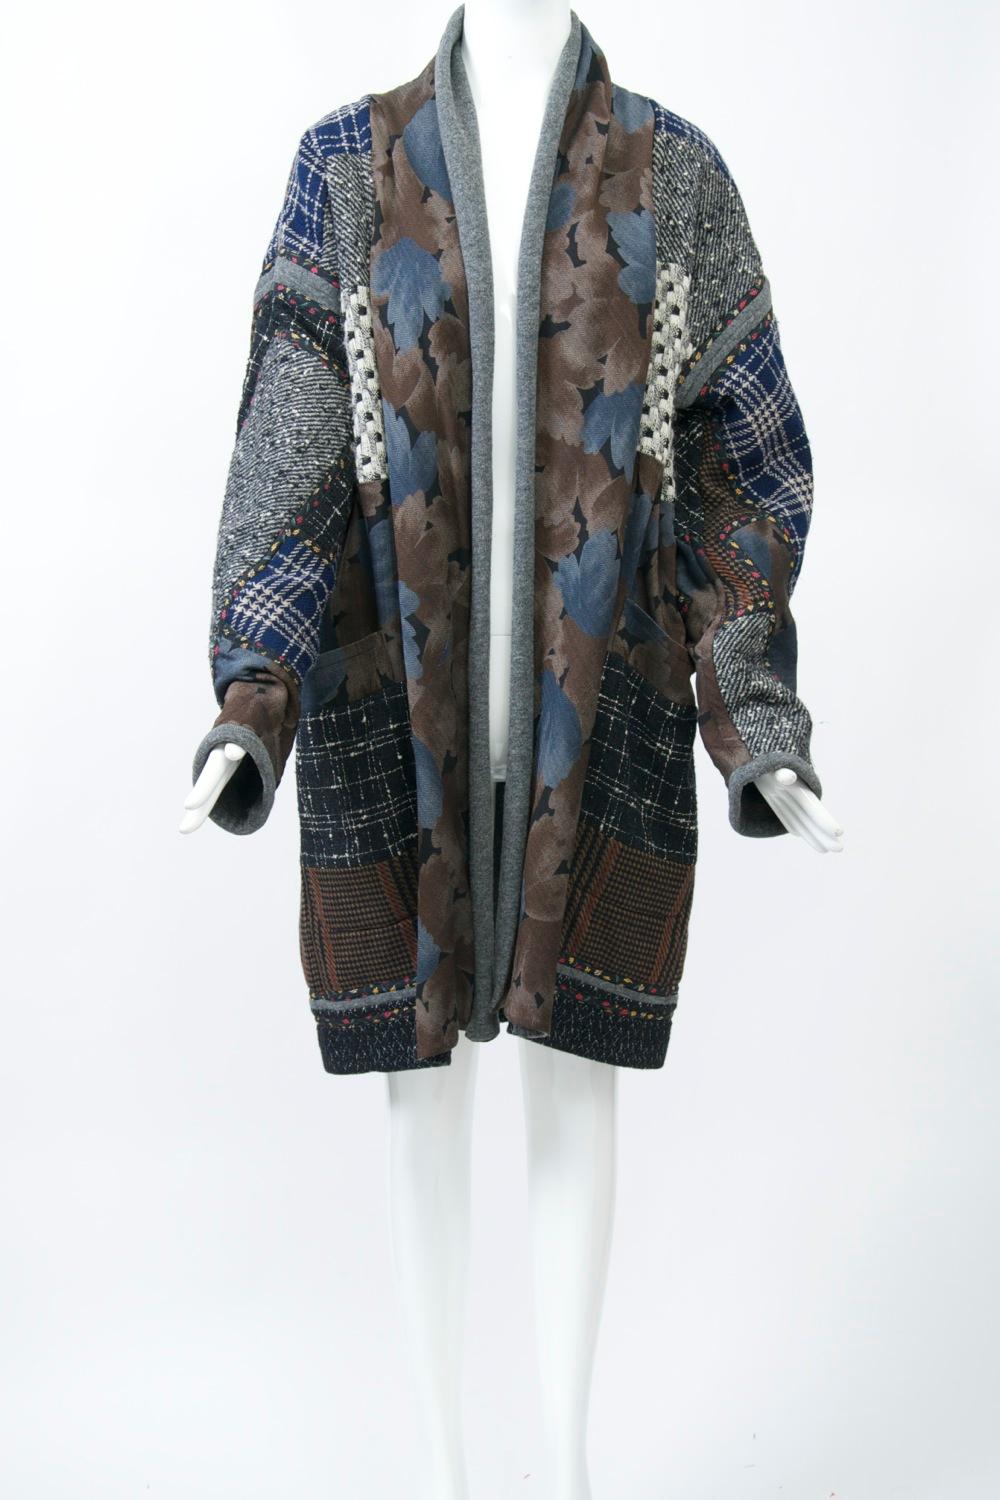 1980s Koos van den Akker jacket in iconic patchwork design. Crafted of patterns in predominantly grays, taupes, and dark blues. Loose fitting 1980s style with dropped shoulders and open front. Lined in gray wool knit.